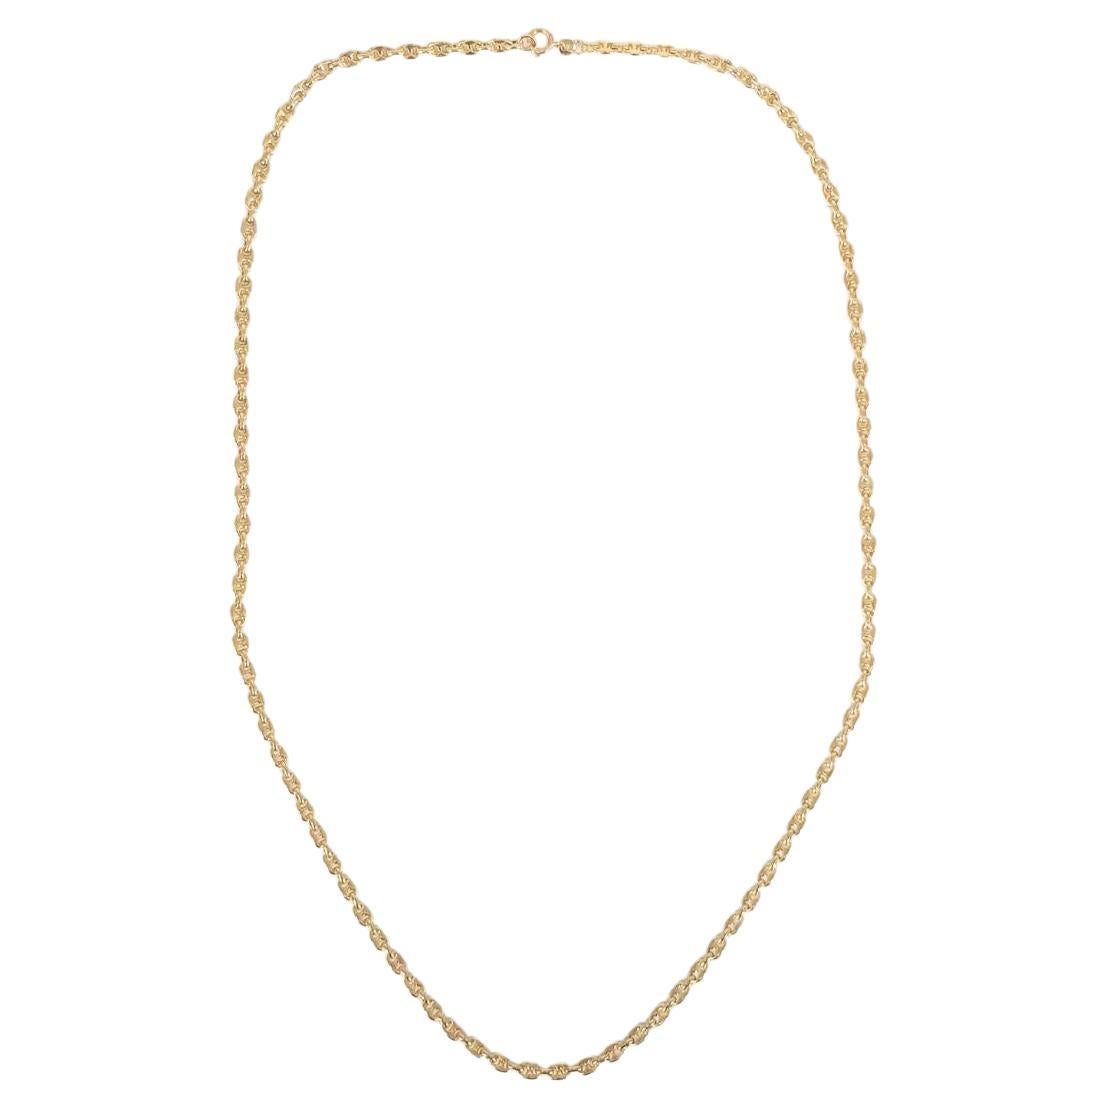 18ct Yellow Gold Gucci Link Chain Necklace